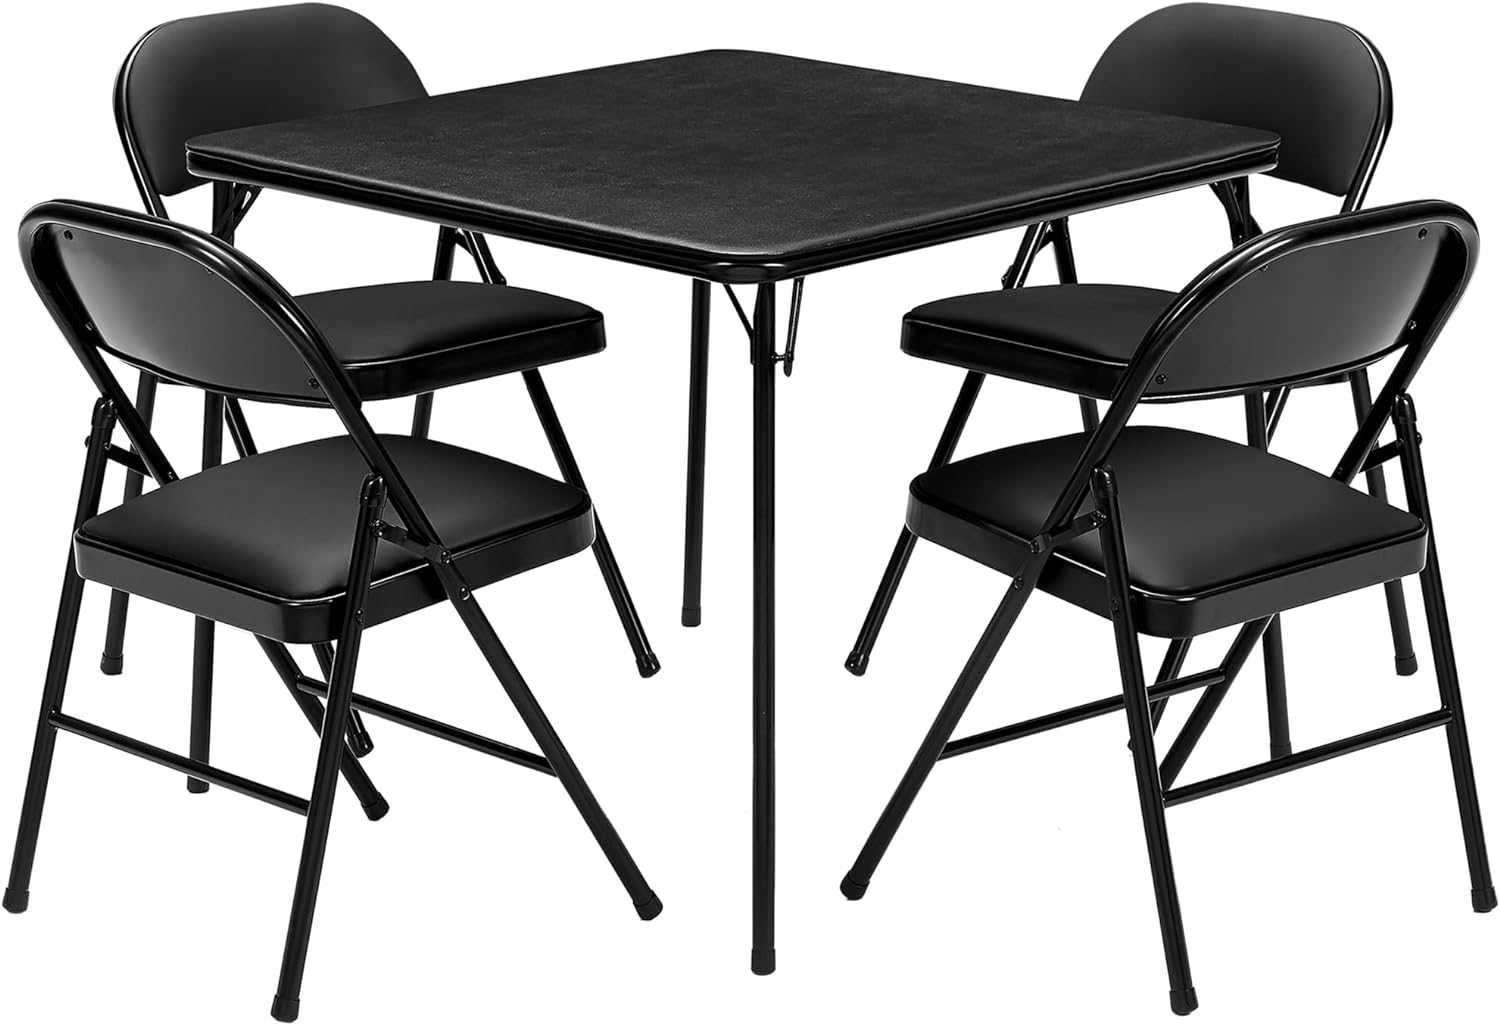 VECELO Portable Folding Card Table Square and Chair Sets with Collapsible Legs & Vinyl Upholstery (5 PCS)